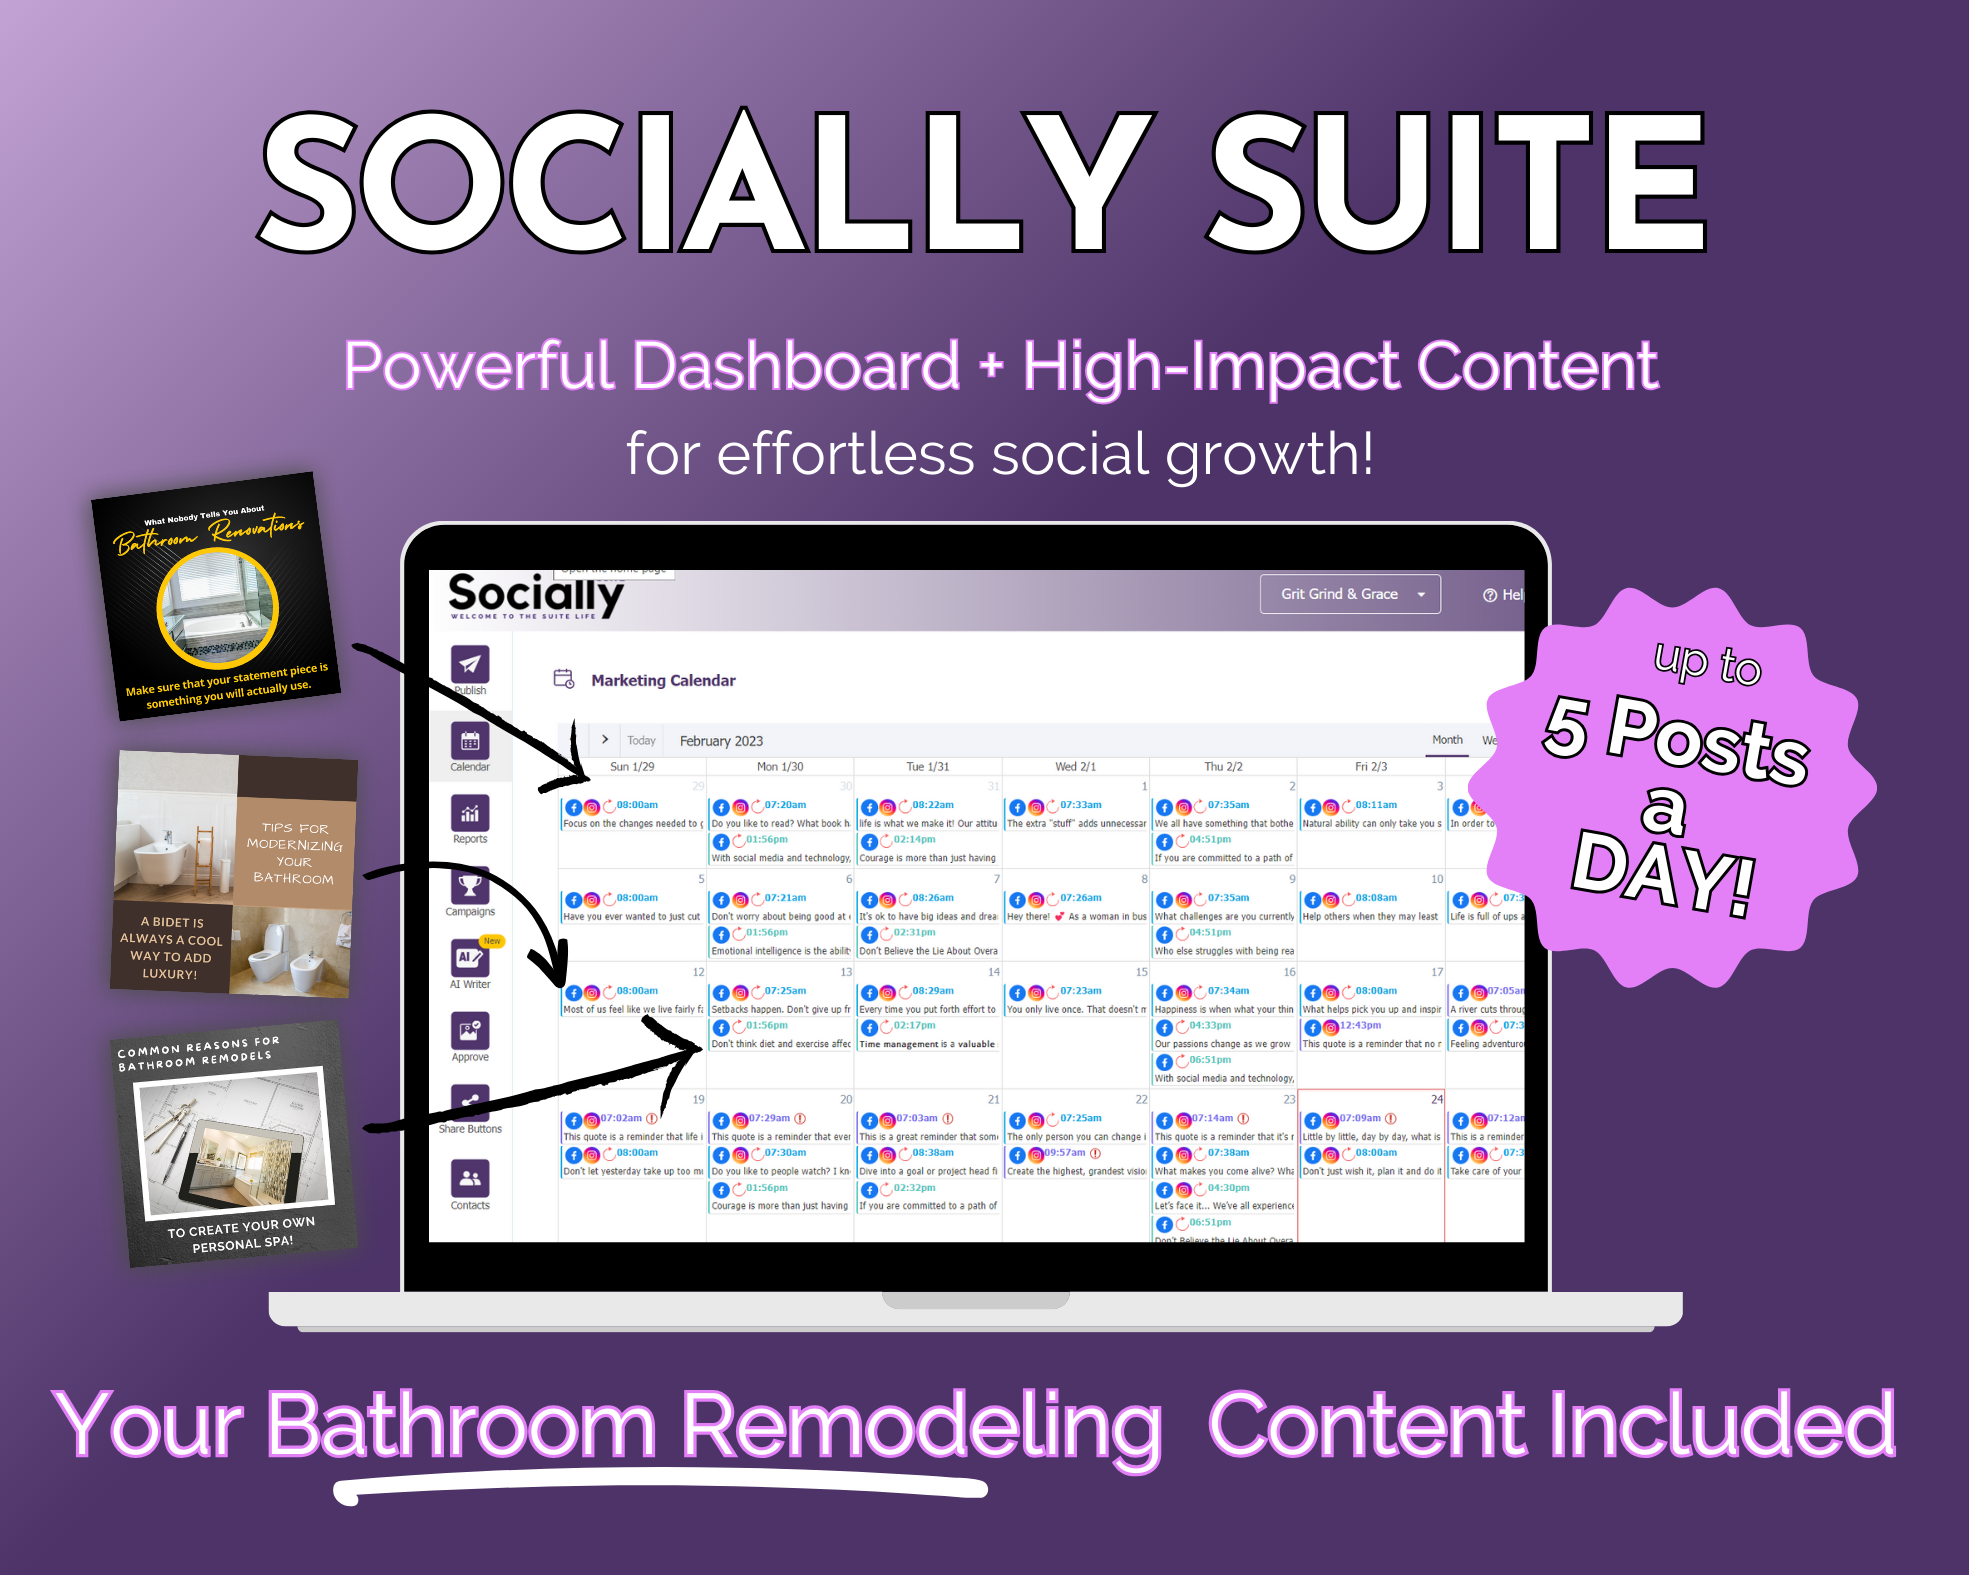 Promotional graphic for "Get Socially Inclined's Socially Suite Membership," a social media marketing tool highlighting a content dashboard for scheduling and bathroom remodeling content, with emphasis on up to 5 posts per day.